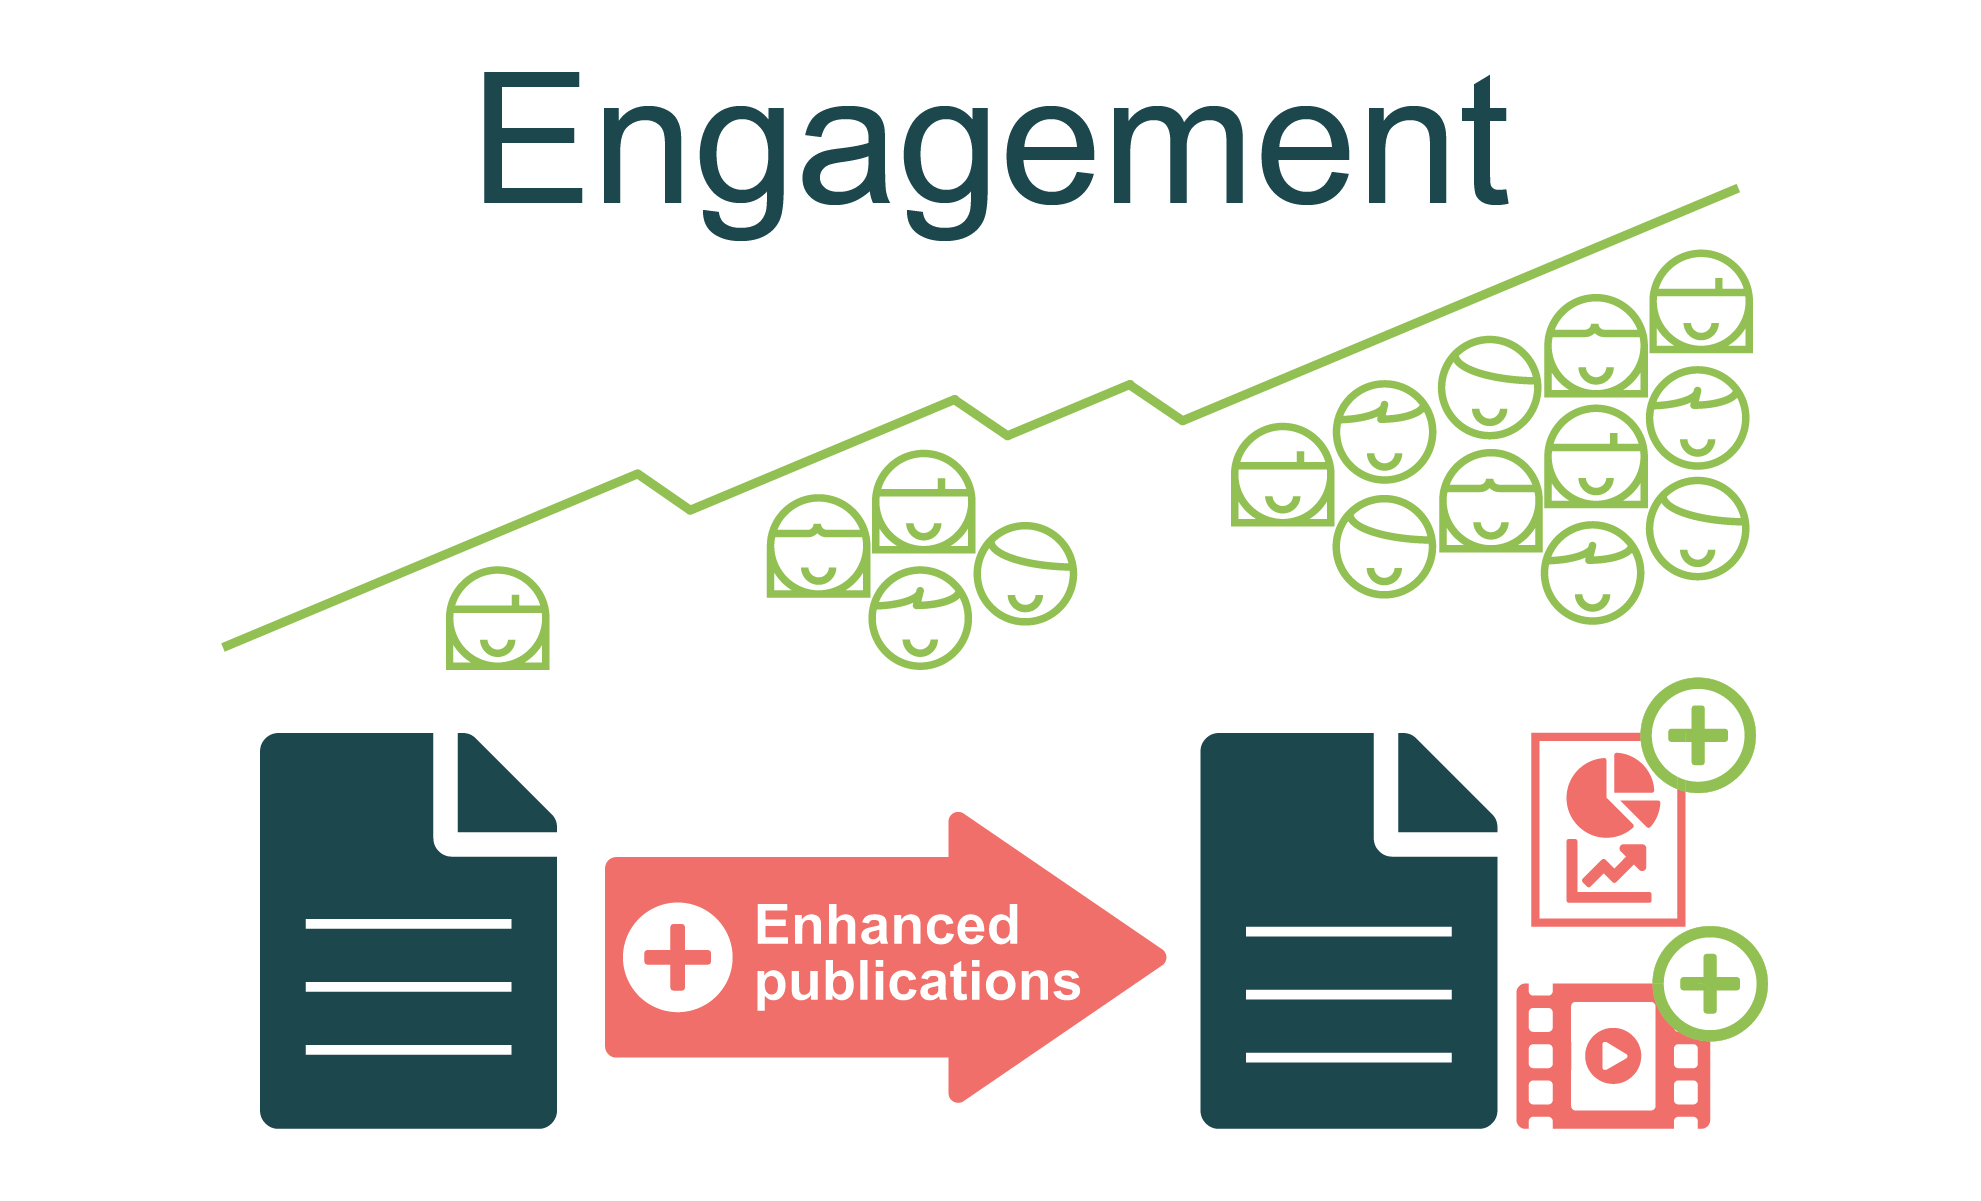 Graphical abstracts, infographics, and plain language summaries and other enhanced content can increase reader engagement and your research impact